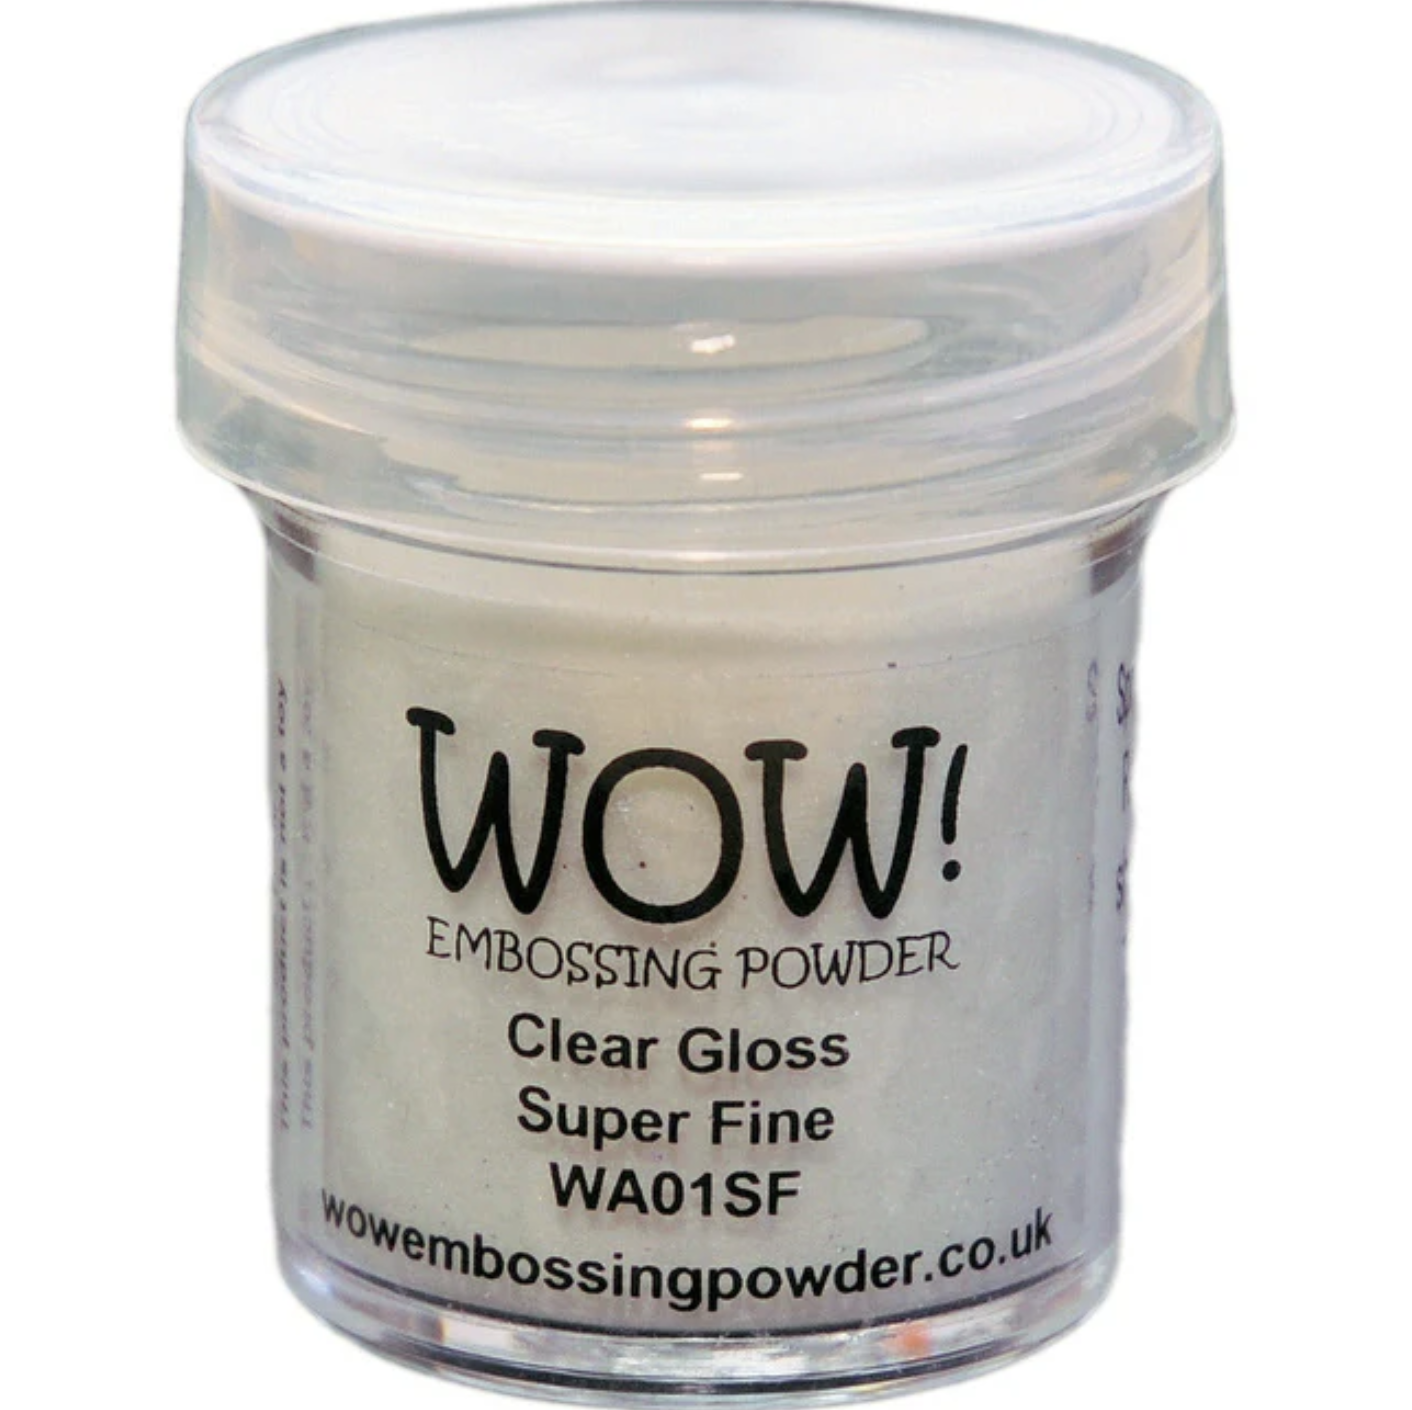 WOW! Embossing Powder - Clear Gloss Super Fine